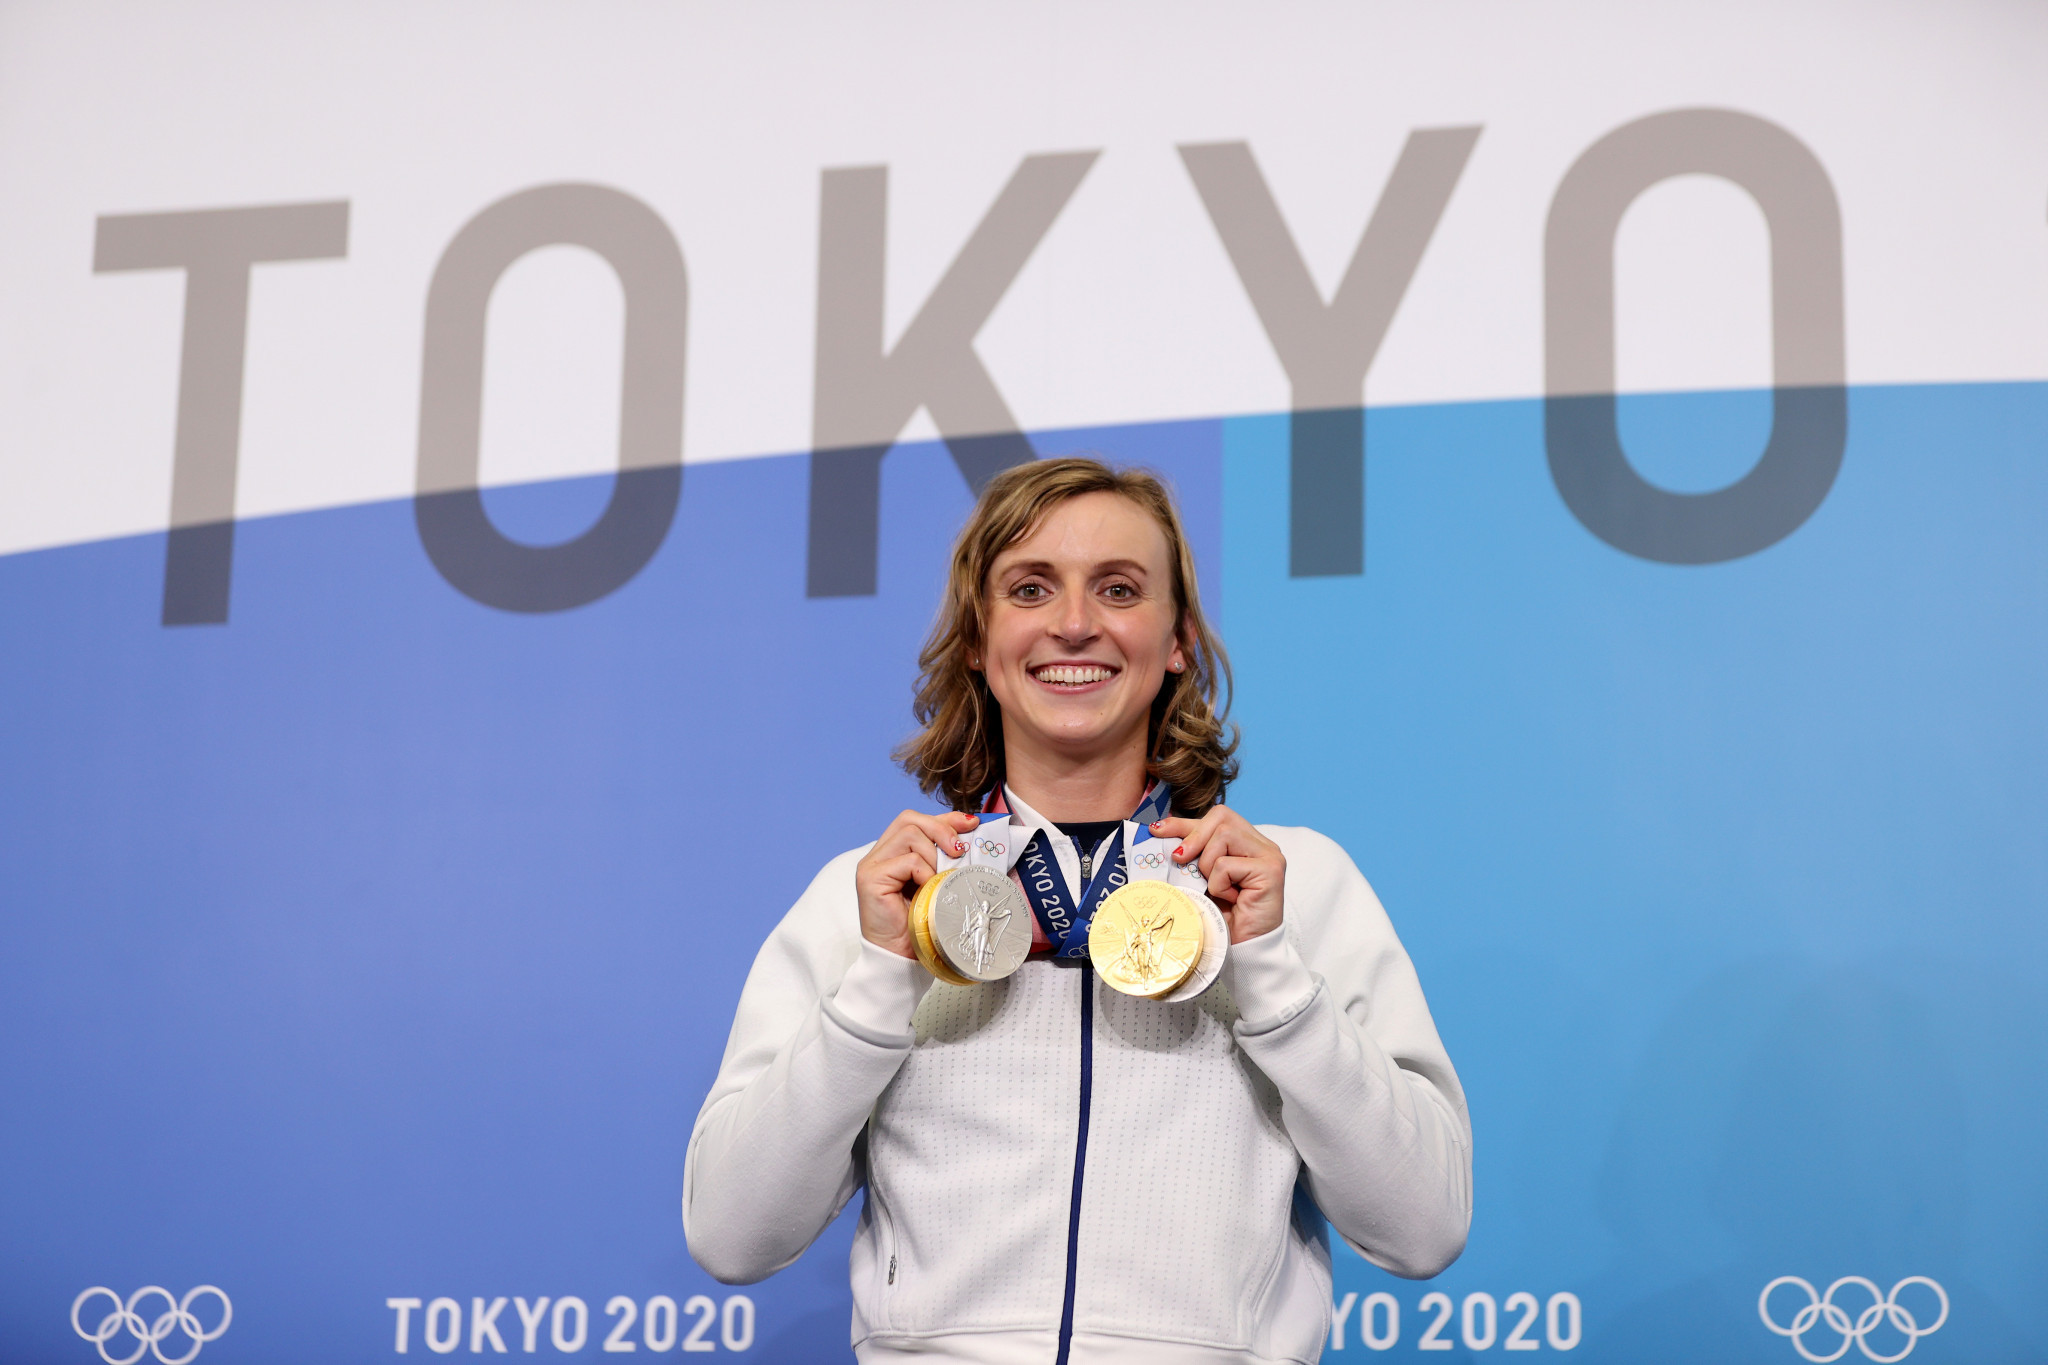 Ledecky poses with her medals at the Tokyo 2020 Olympic Games. GETTY IMAGES